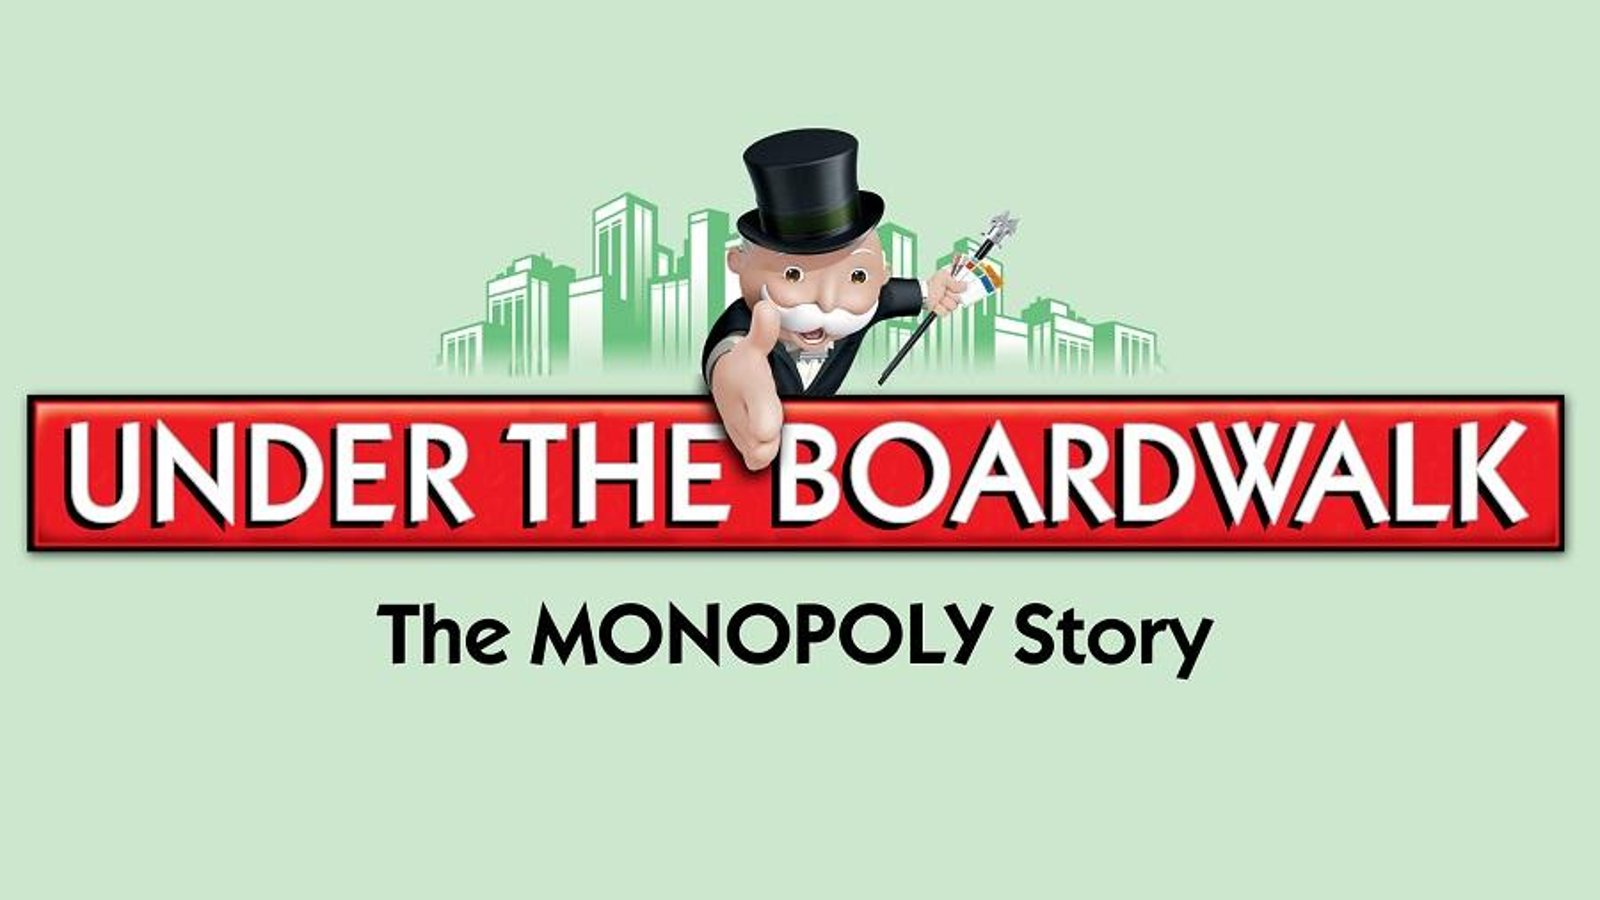 Under the Boardwalk - The Monopoly Story